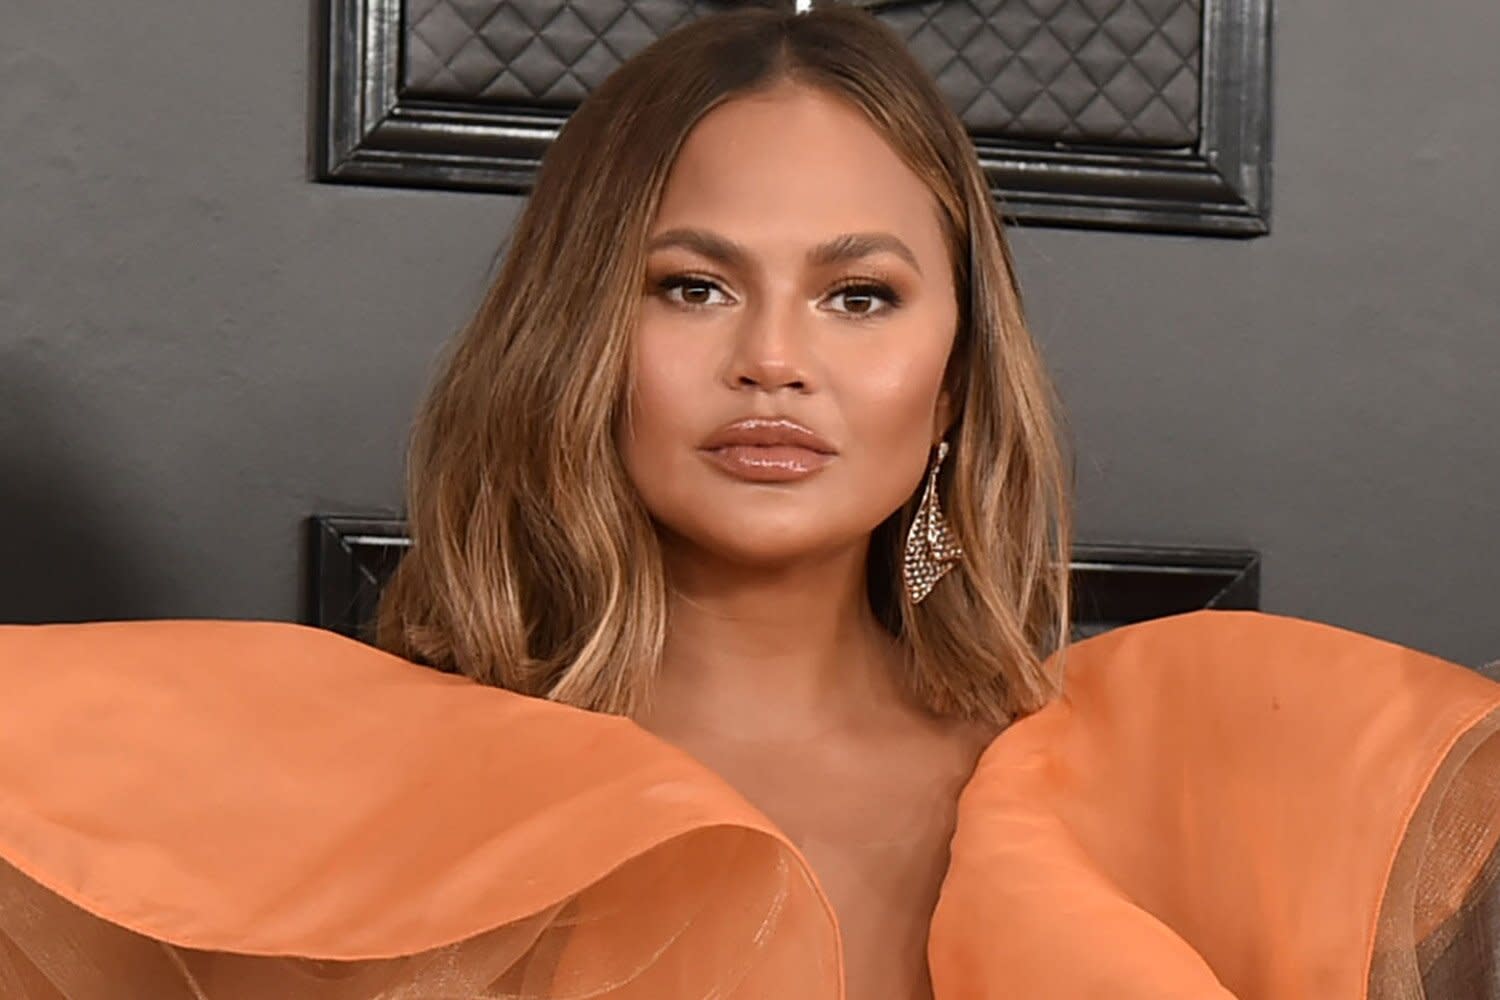 Chrissy Teigen talks about the book that inspired her sobriety, stops like a woman